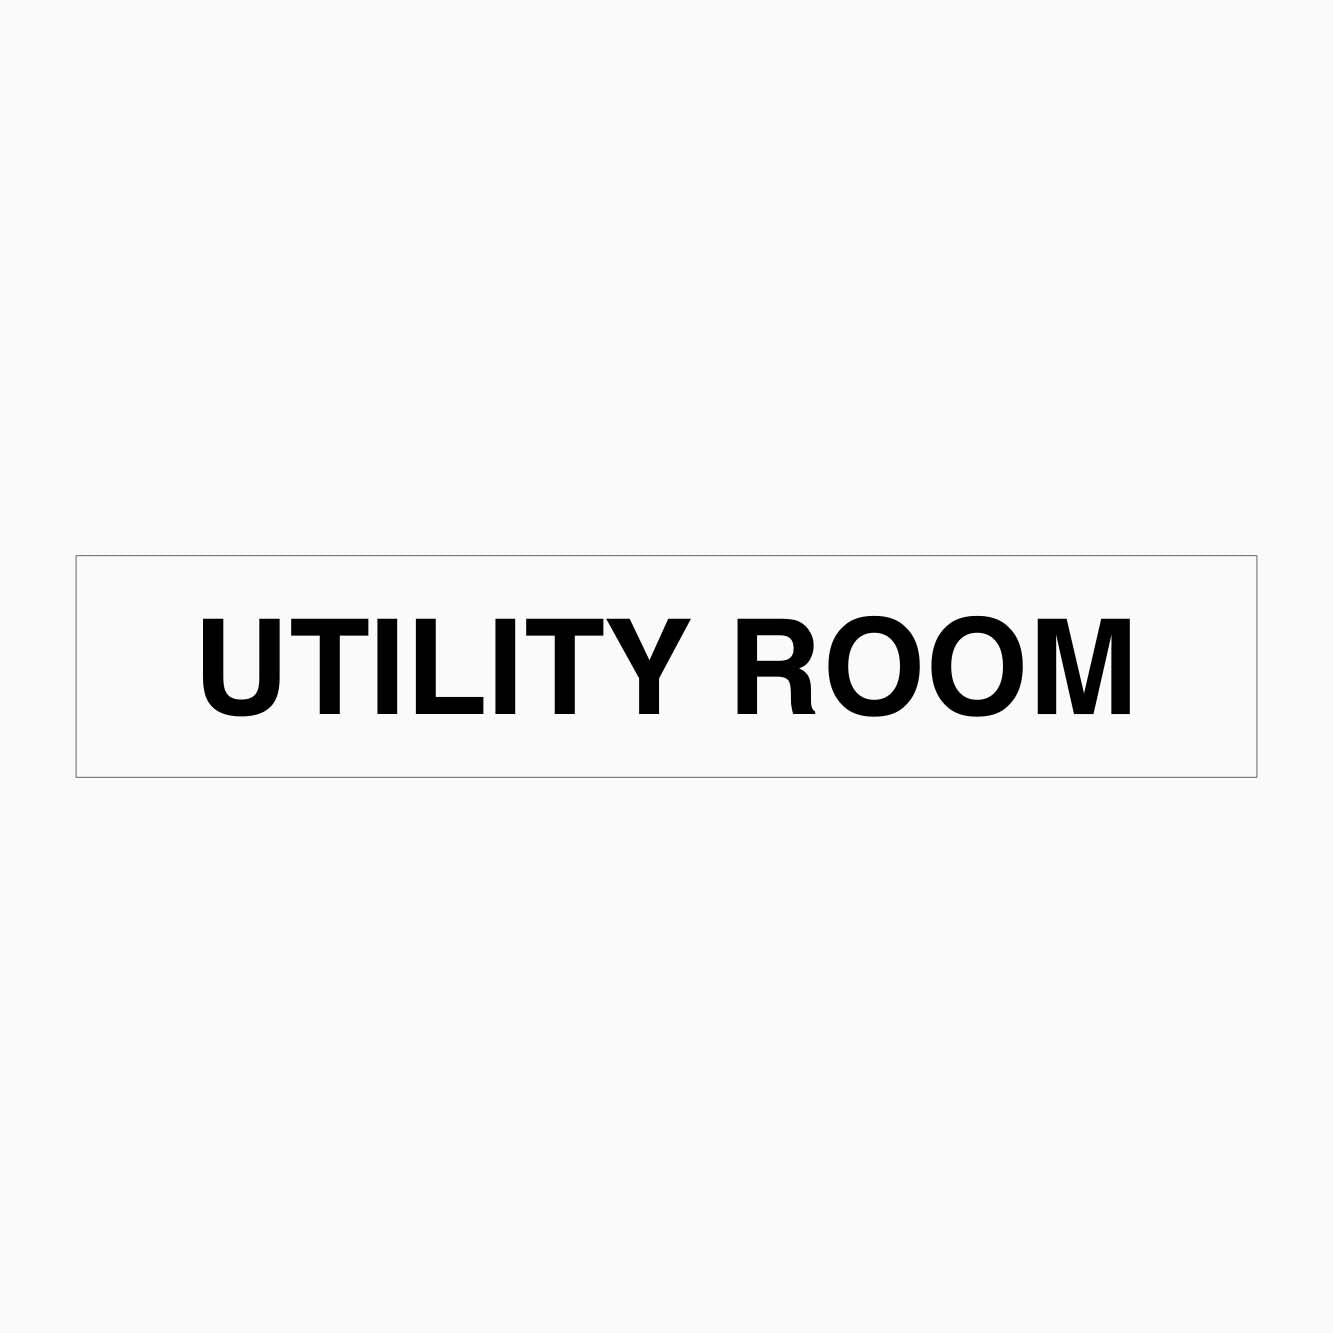 UTILITY ROOM SIGN - GET SIGNS